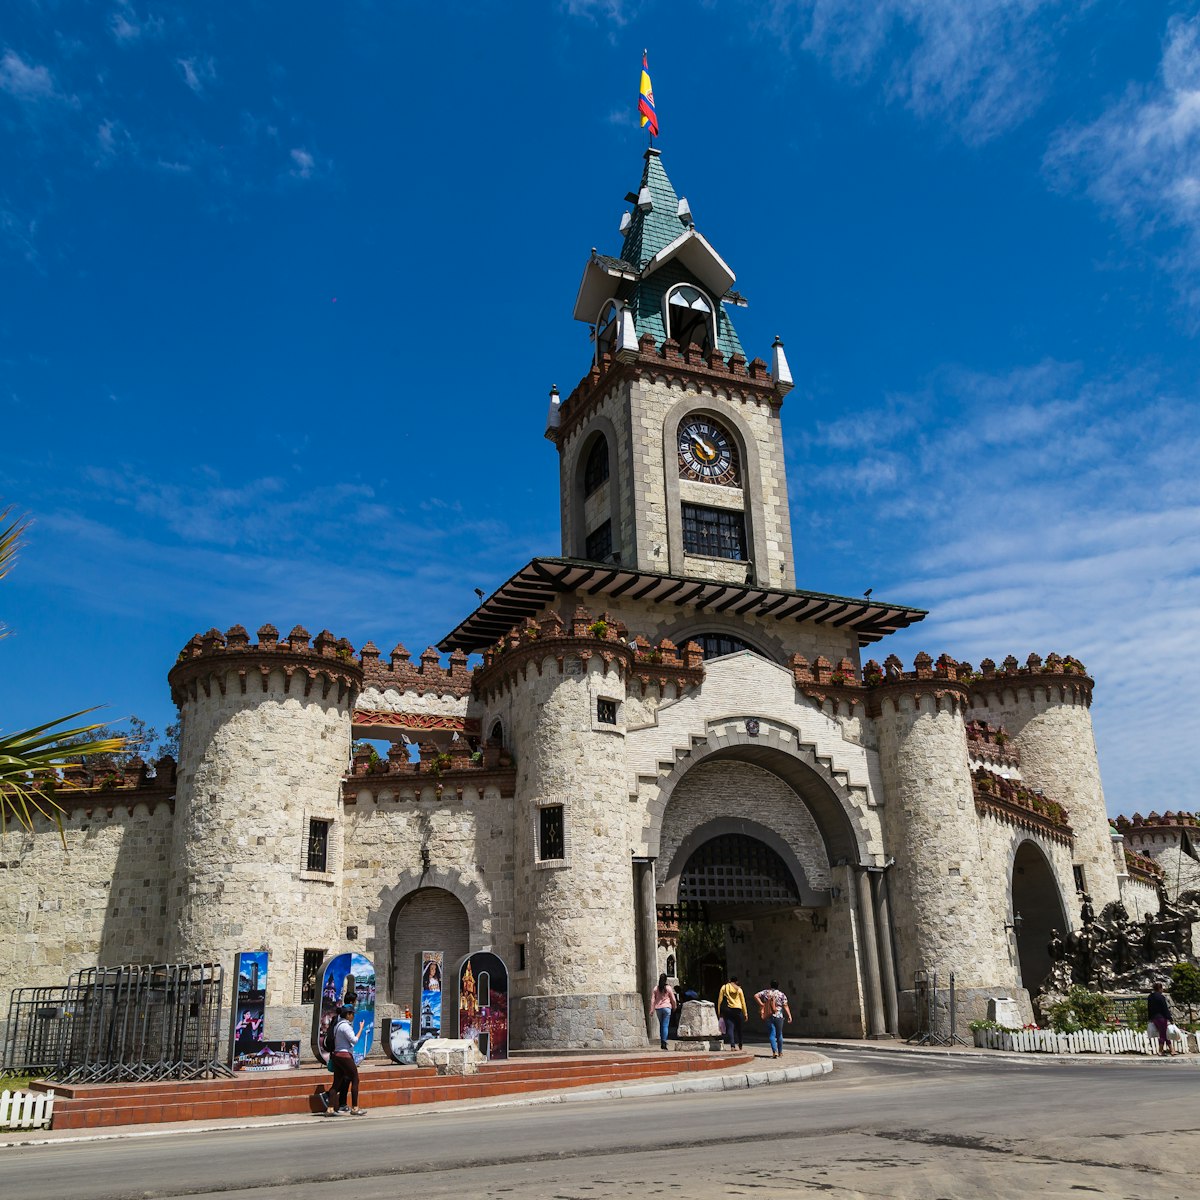 Medieval style castle known as the gateway to the city of Loja, Ecuador.